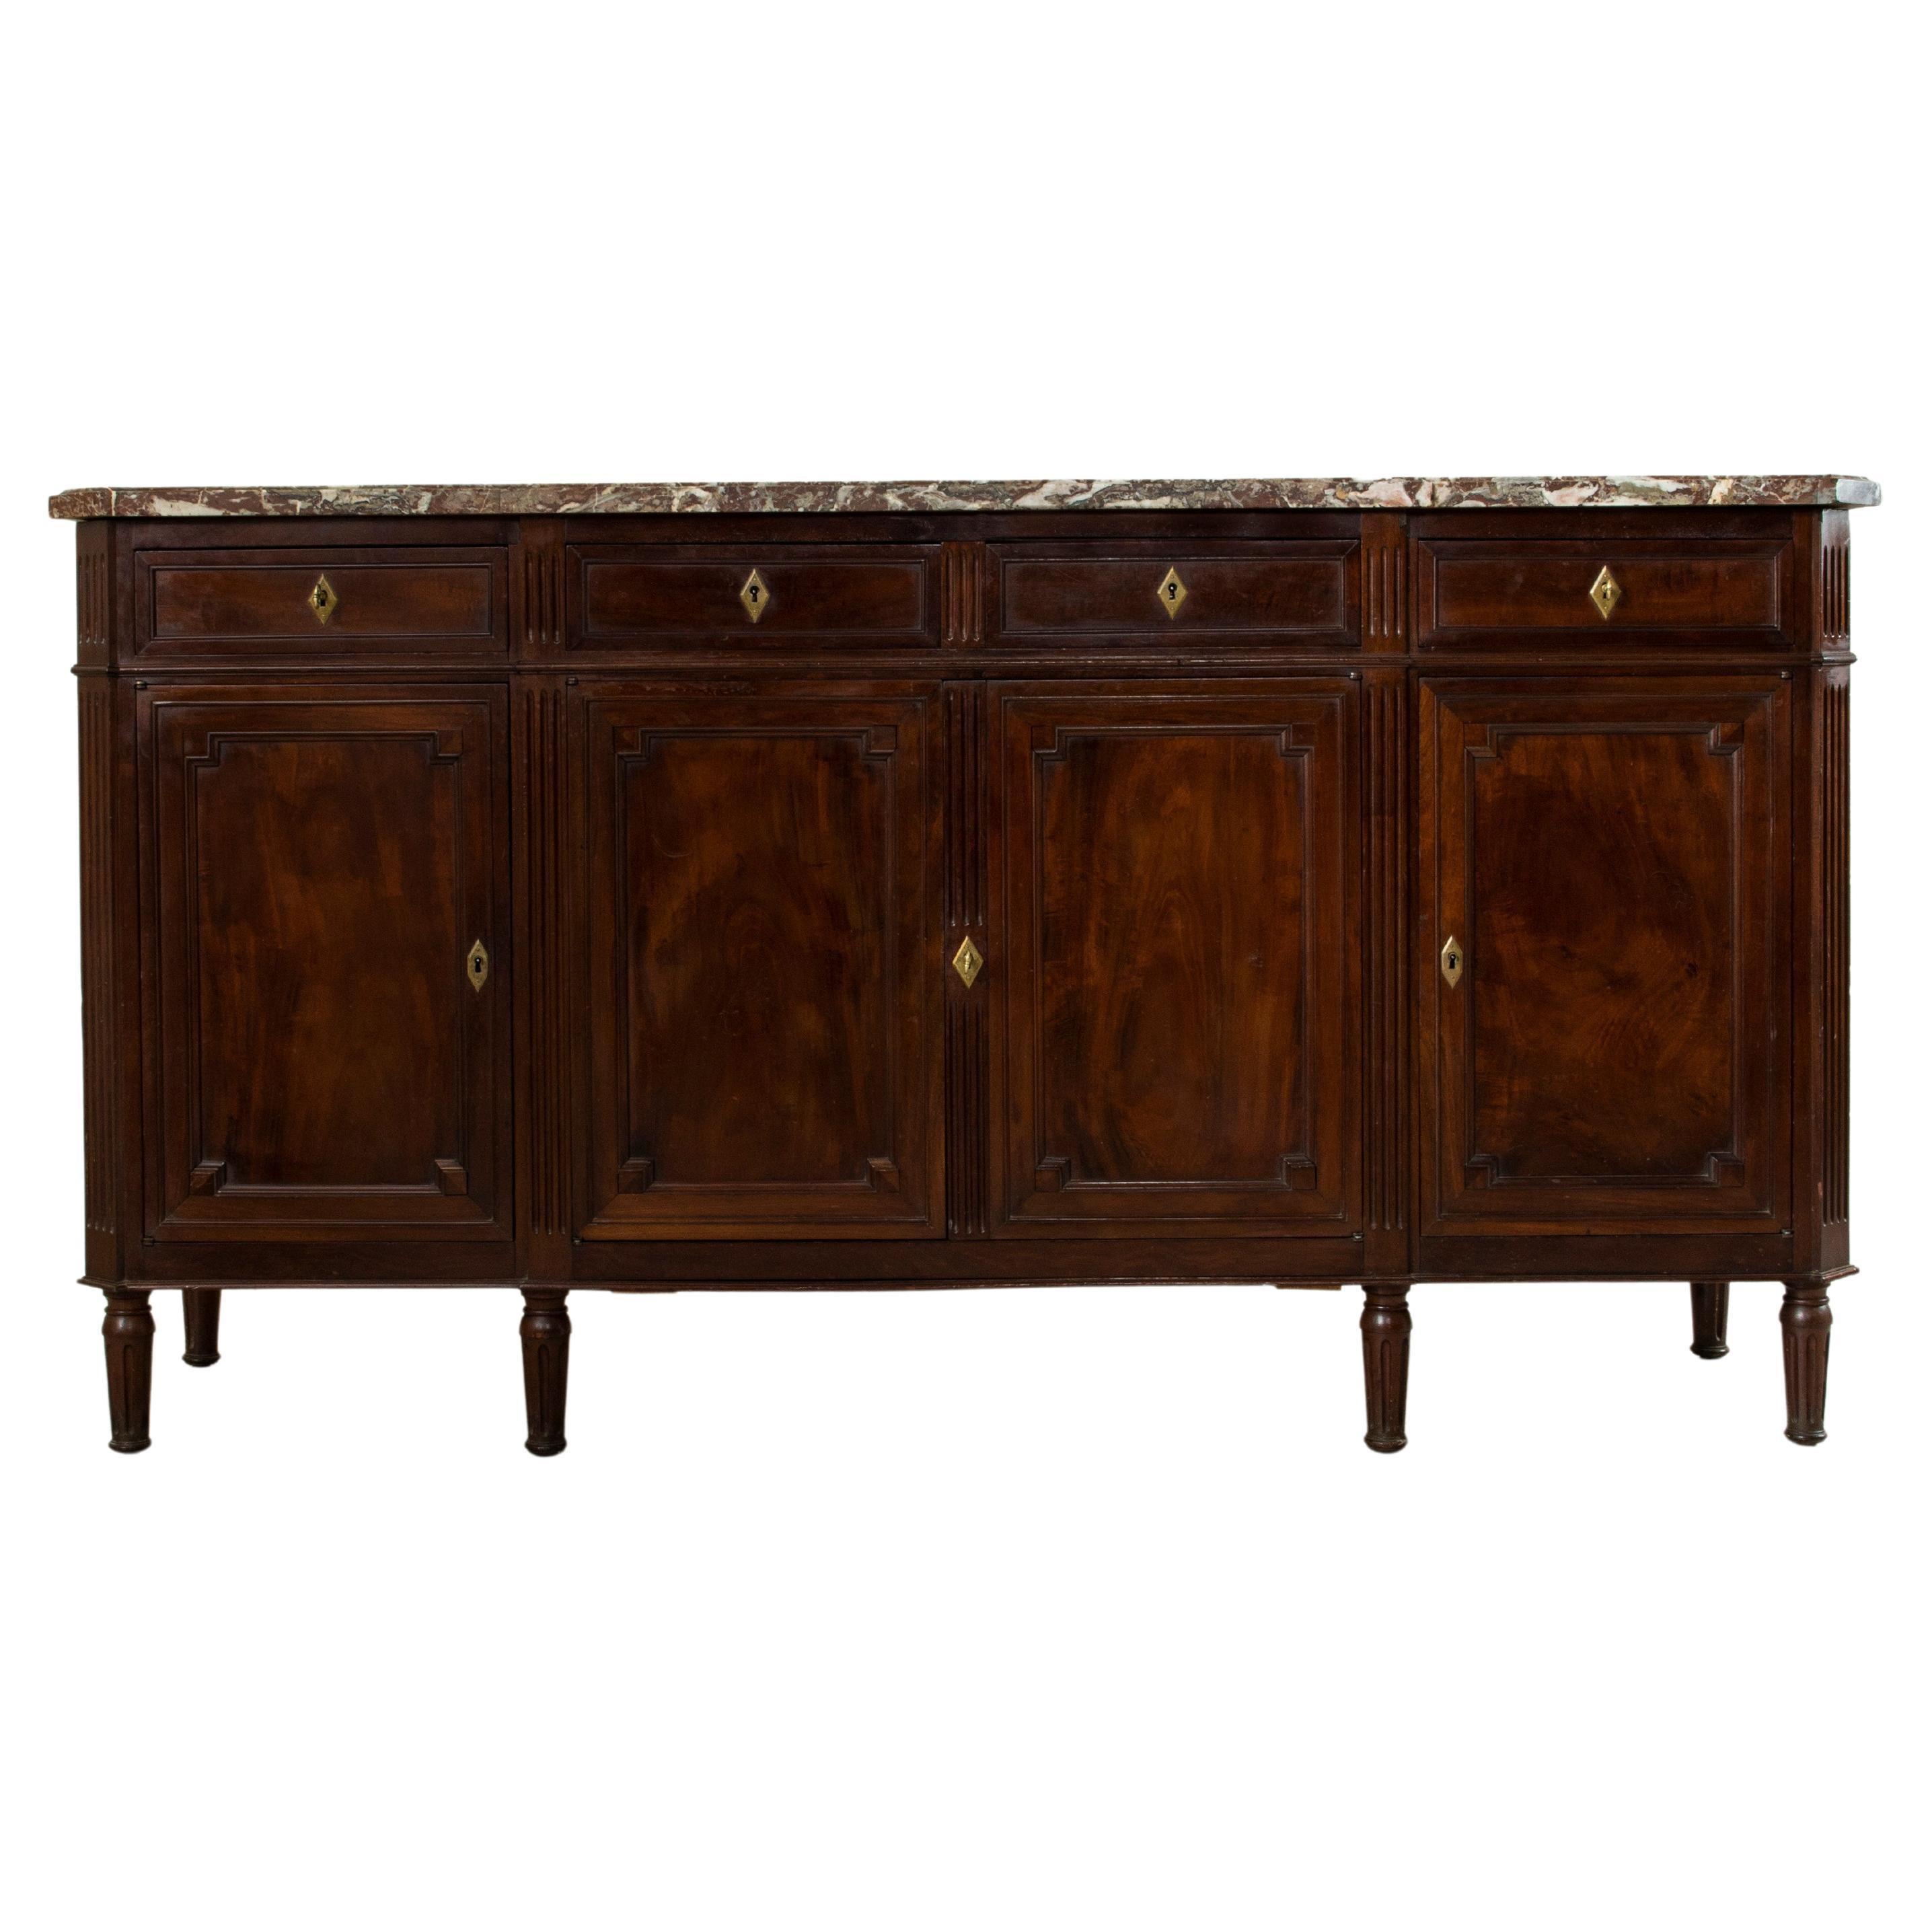 Early 19th Century French Louis XVI Mahogany Sideboard with Marble Top